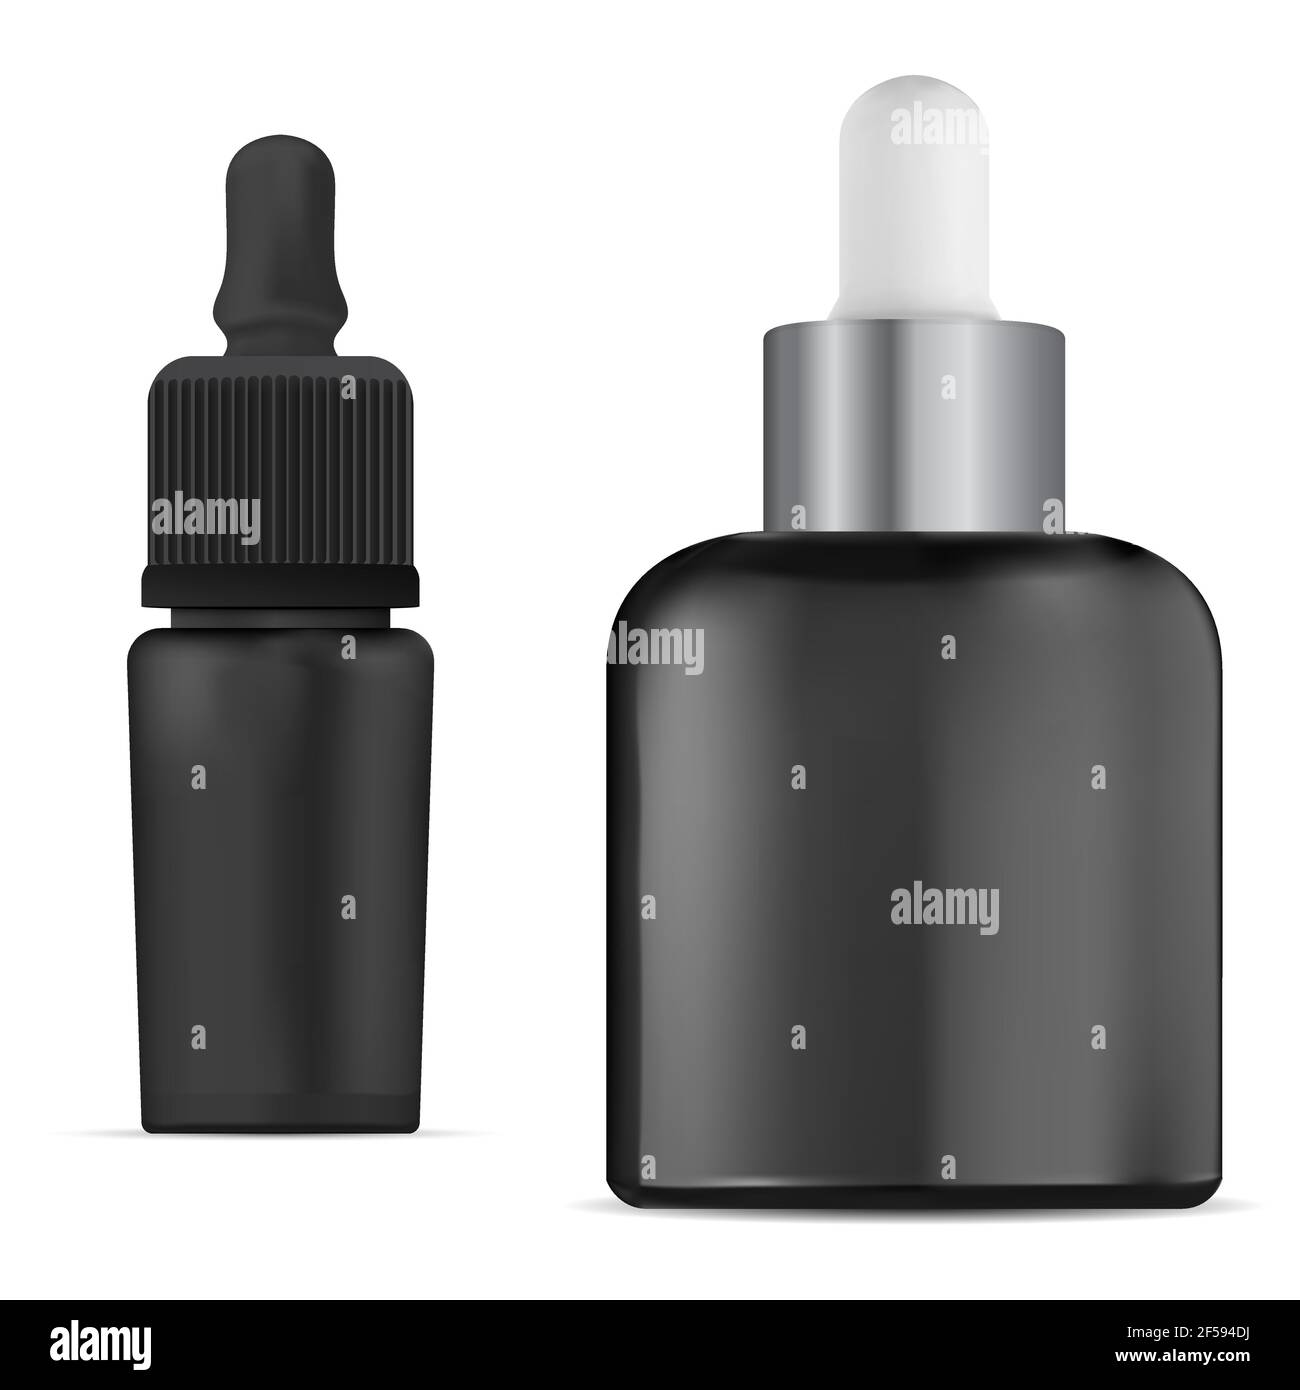 Essential oil dropper bottle. Cosmetic serum container black bottle mockup. Liquid organic essence vial with pipette, treatment flask design isolated Stock Vector